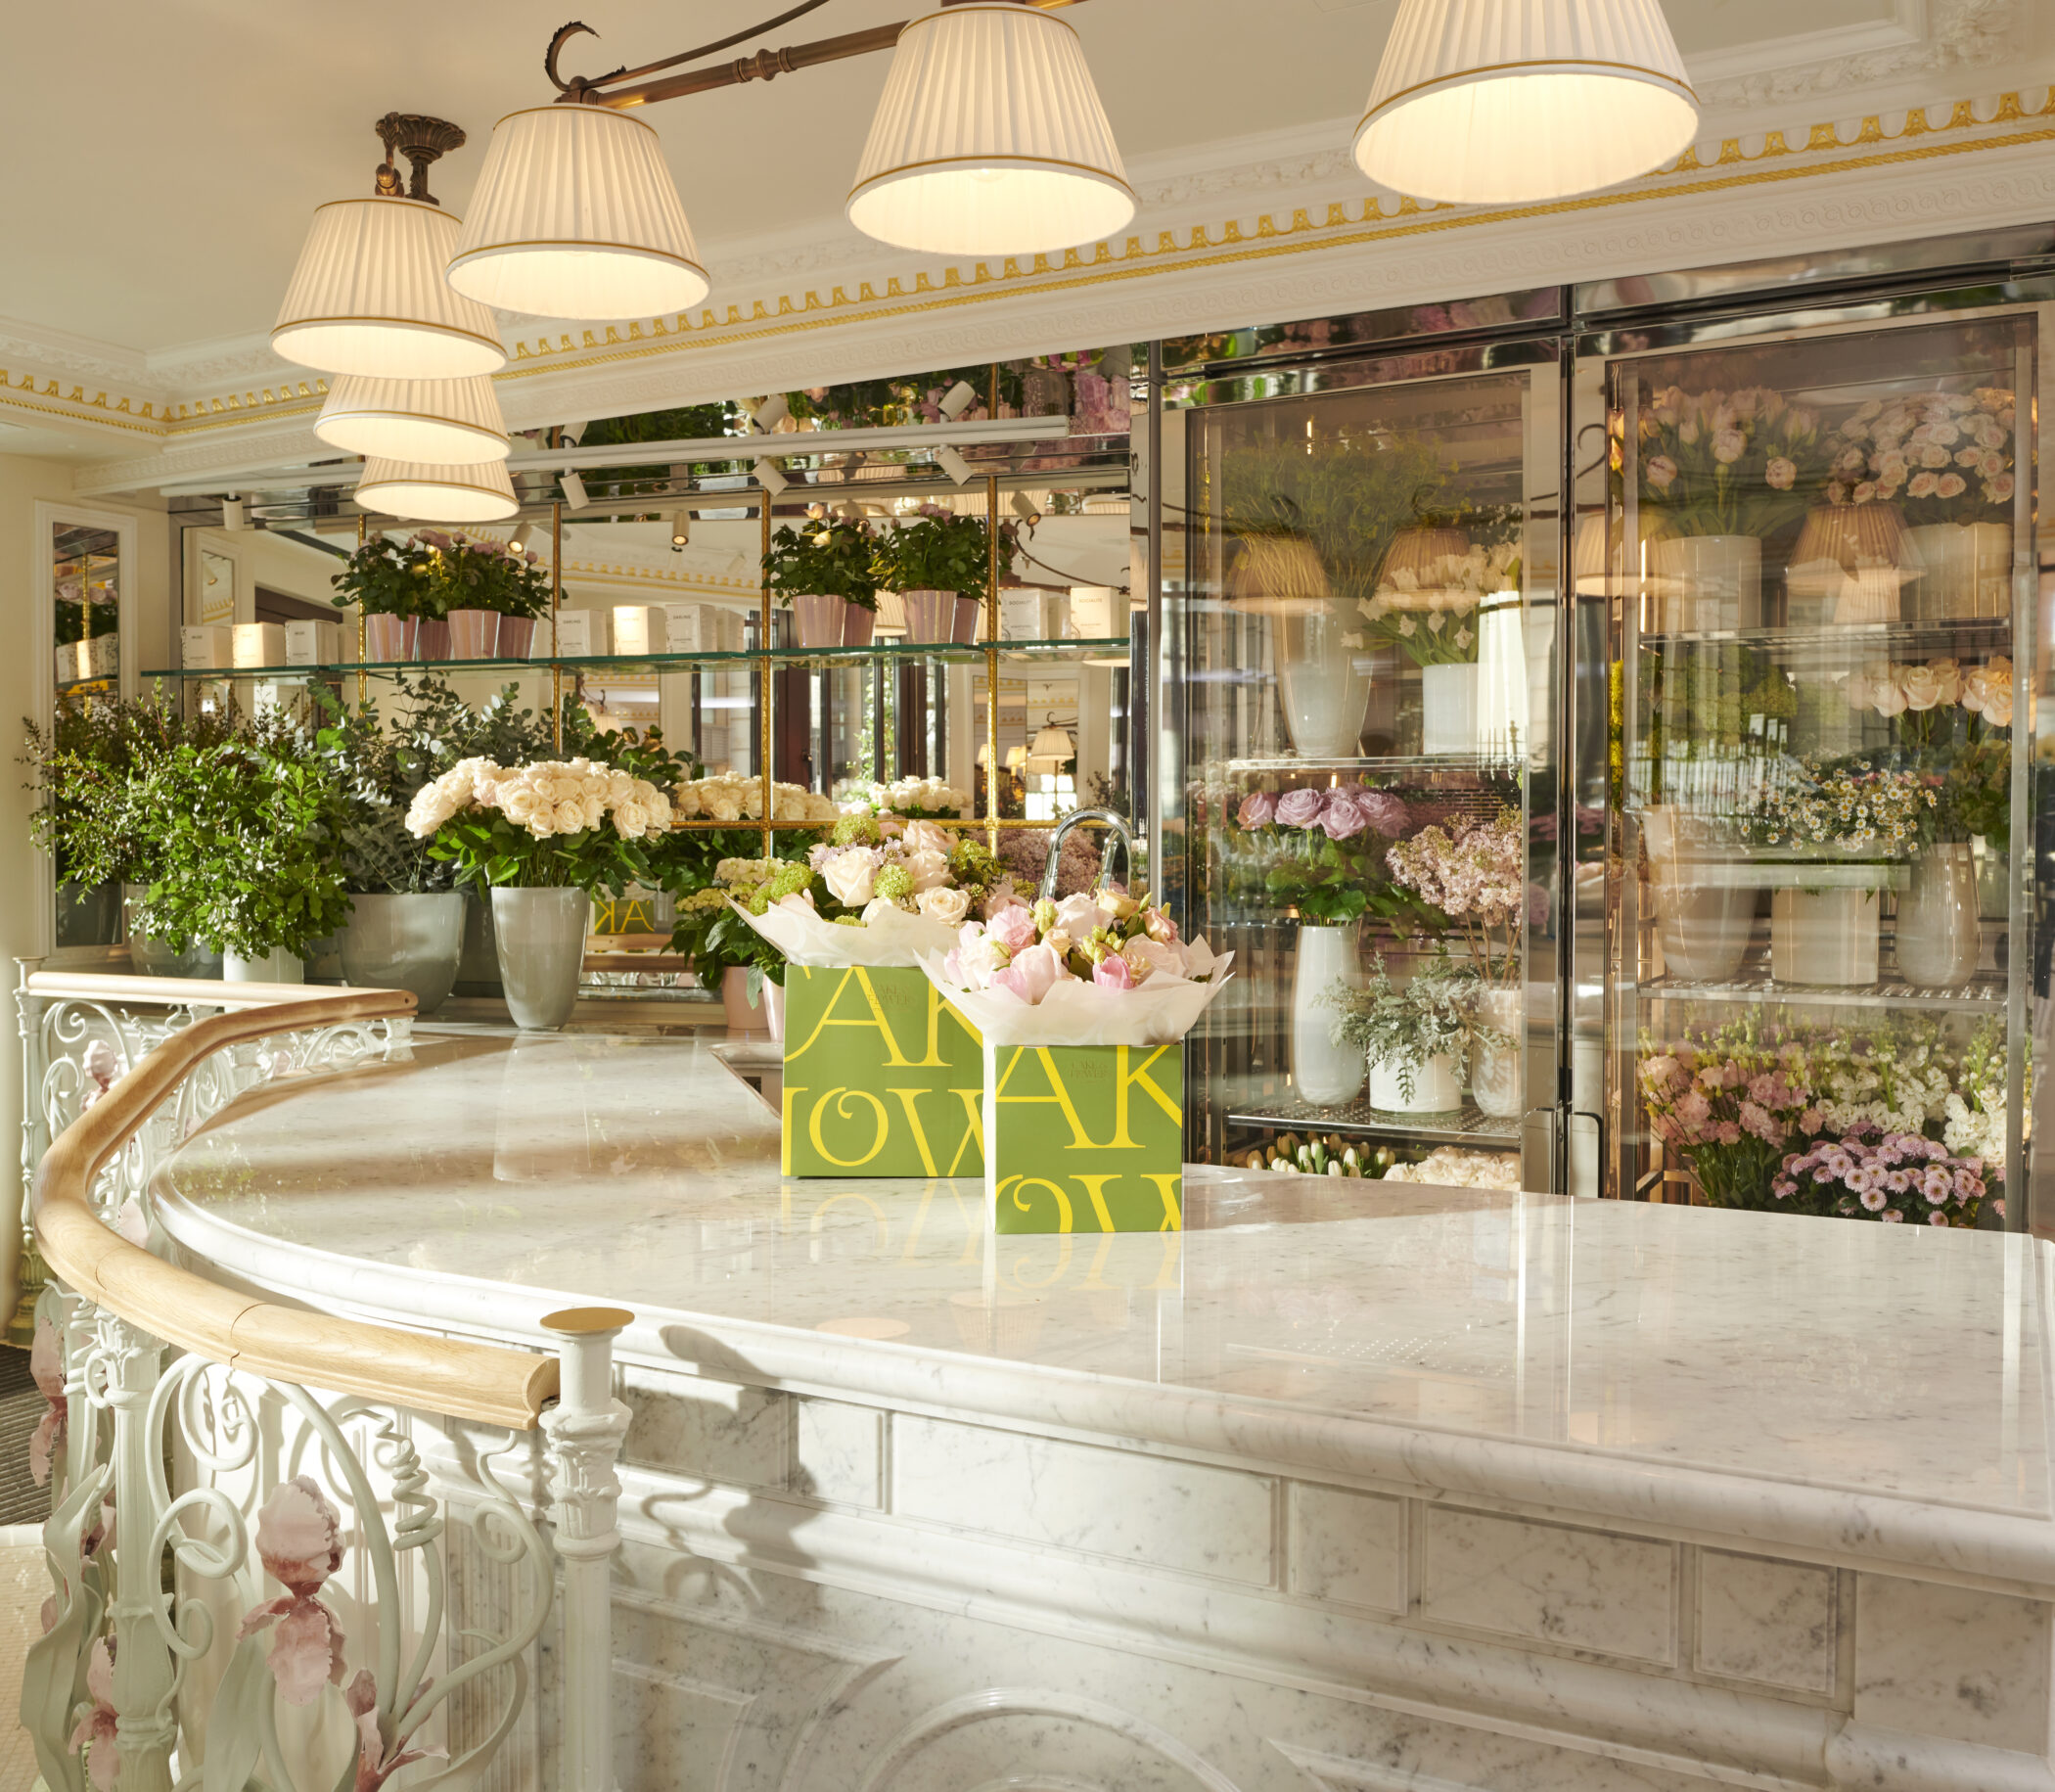 The Dorchester - Cake and Flowers